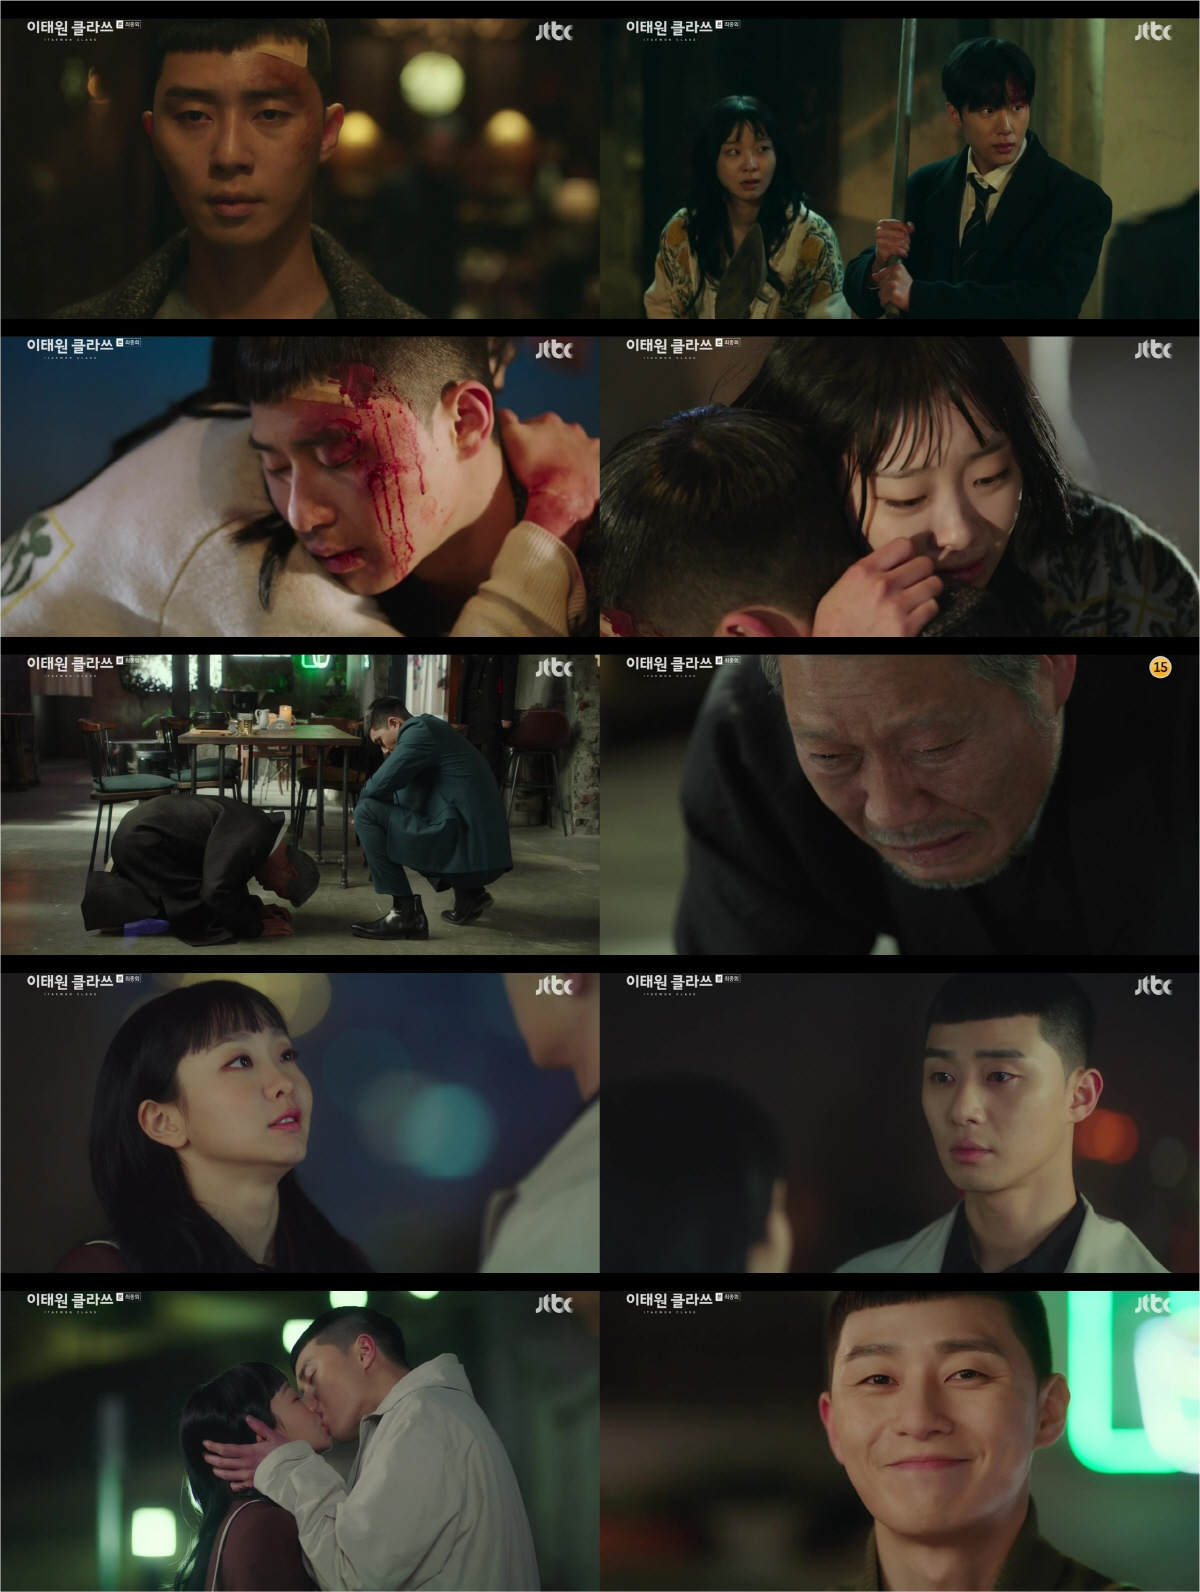 JTBC gilt drama Itaewon Clath ended on the 21st with favorable reviews and praise.In the final episode that aired on the 21st, a sweet night came to Park Seo-joons tired and bitter life.The fond confession towards Joe-yool Lee (Kim Dae-mi) provoked excitement, and the 15-year battle with Jang Dae-hee (Yoo Jae-myung) gave a thrilling and thrilling catharsis.It was perfect happy endings.On the day of the show, Park kneeled down to Chang and said, I am sorry. But Park was the one who really won the game.I am glad to kneel like this. He criticized the drowsy and ugly side of Chang.Even with the appearance of the Park who wanted so much, Chang could not hide his empty mind.Joe-yool Lee had a breathtaking chase with a group of Jean The Fountainhead (Security), Kim Hee-hoon (Won Hyun-joon).When Roy and Choi (Ryu Kyung-soo) came to save him, they collided head-on with each other, and finally, when they faced each others hearts, they fled together.But Jean followed them closely, and Roy ran into a bloodbath after sending Joe-yool Lee first.Back with the police, Joe-yool Lee wept, holding Roy, who was heartbroken by Roys promise and promise to be happy.The accusations by Oh Soo-ah (Kwon Nara) led to the catastrophe of Chang and Janga Group.Jang Ga-man, who has been working for a lifetime, tried to watch, but they were merged into I.C. of Park Sae-jae, who fell into the weak according to the The late chairman of the company kneeled down and apologized with tears, but Park said, Do business, Mr. Chairman.With the dismantling of Janga, Oh Soo-ah opened his restaurant and started a new life, and Jang Geun-soo (Kim Dong-hee) asked everyone to forgive and left.Back in the long way, the romance of Joe-yool Lee heated the audiences excitement.Roys life with the precious Sanbam members and Joe-yool Lee was so happy.The full happy endings of Roy, who has achieved both revenge and love, have made viewers feel uncomfortable.On the other hand, the broadcast recorded its highest score of 16.5% nationwide and 18.3% in the Seoul metropolitan area (Nilson Korea, based on paid households), earning the beauty of Liu Cong.